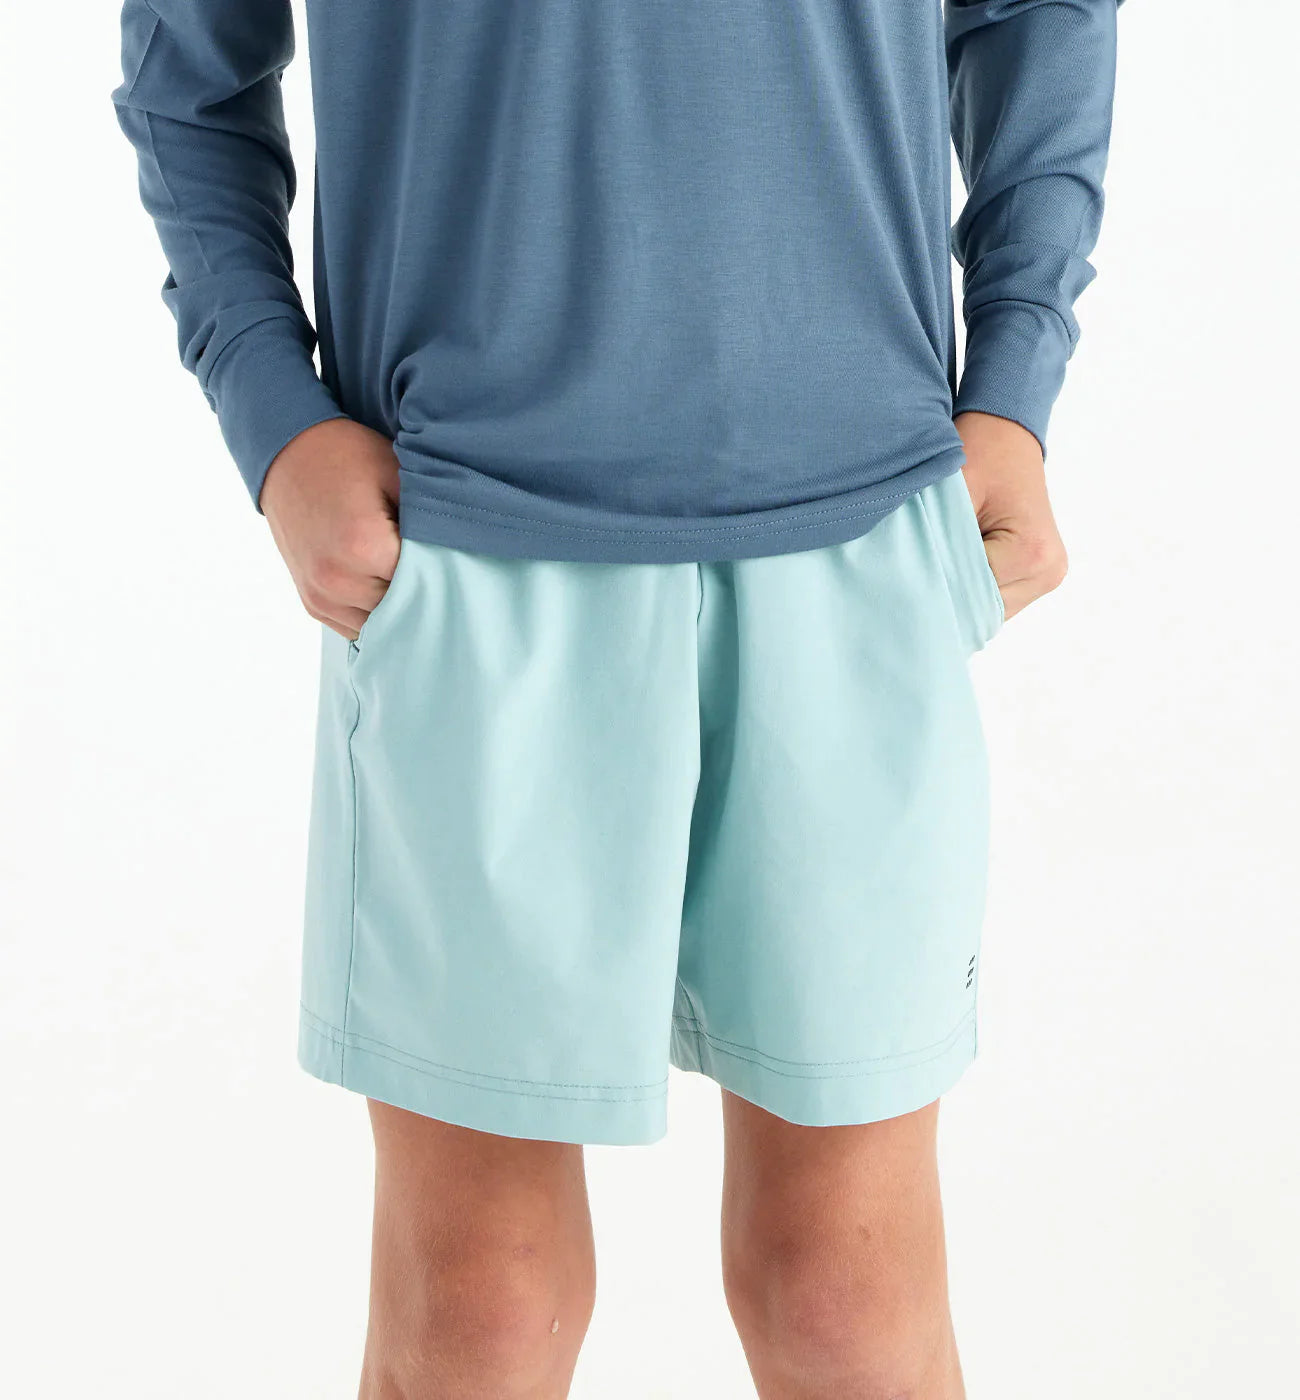 Free Fly Youth Breeze Short